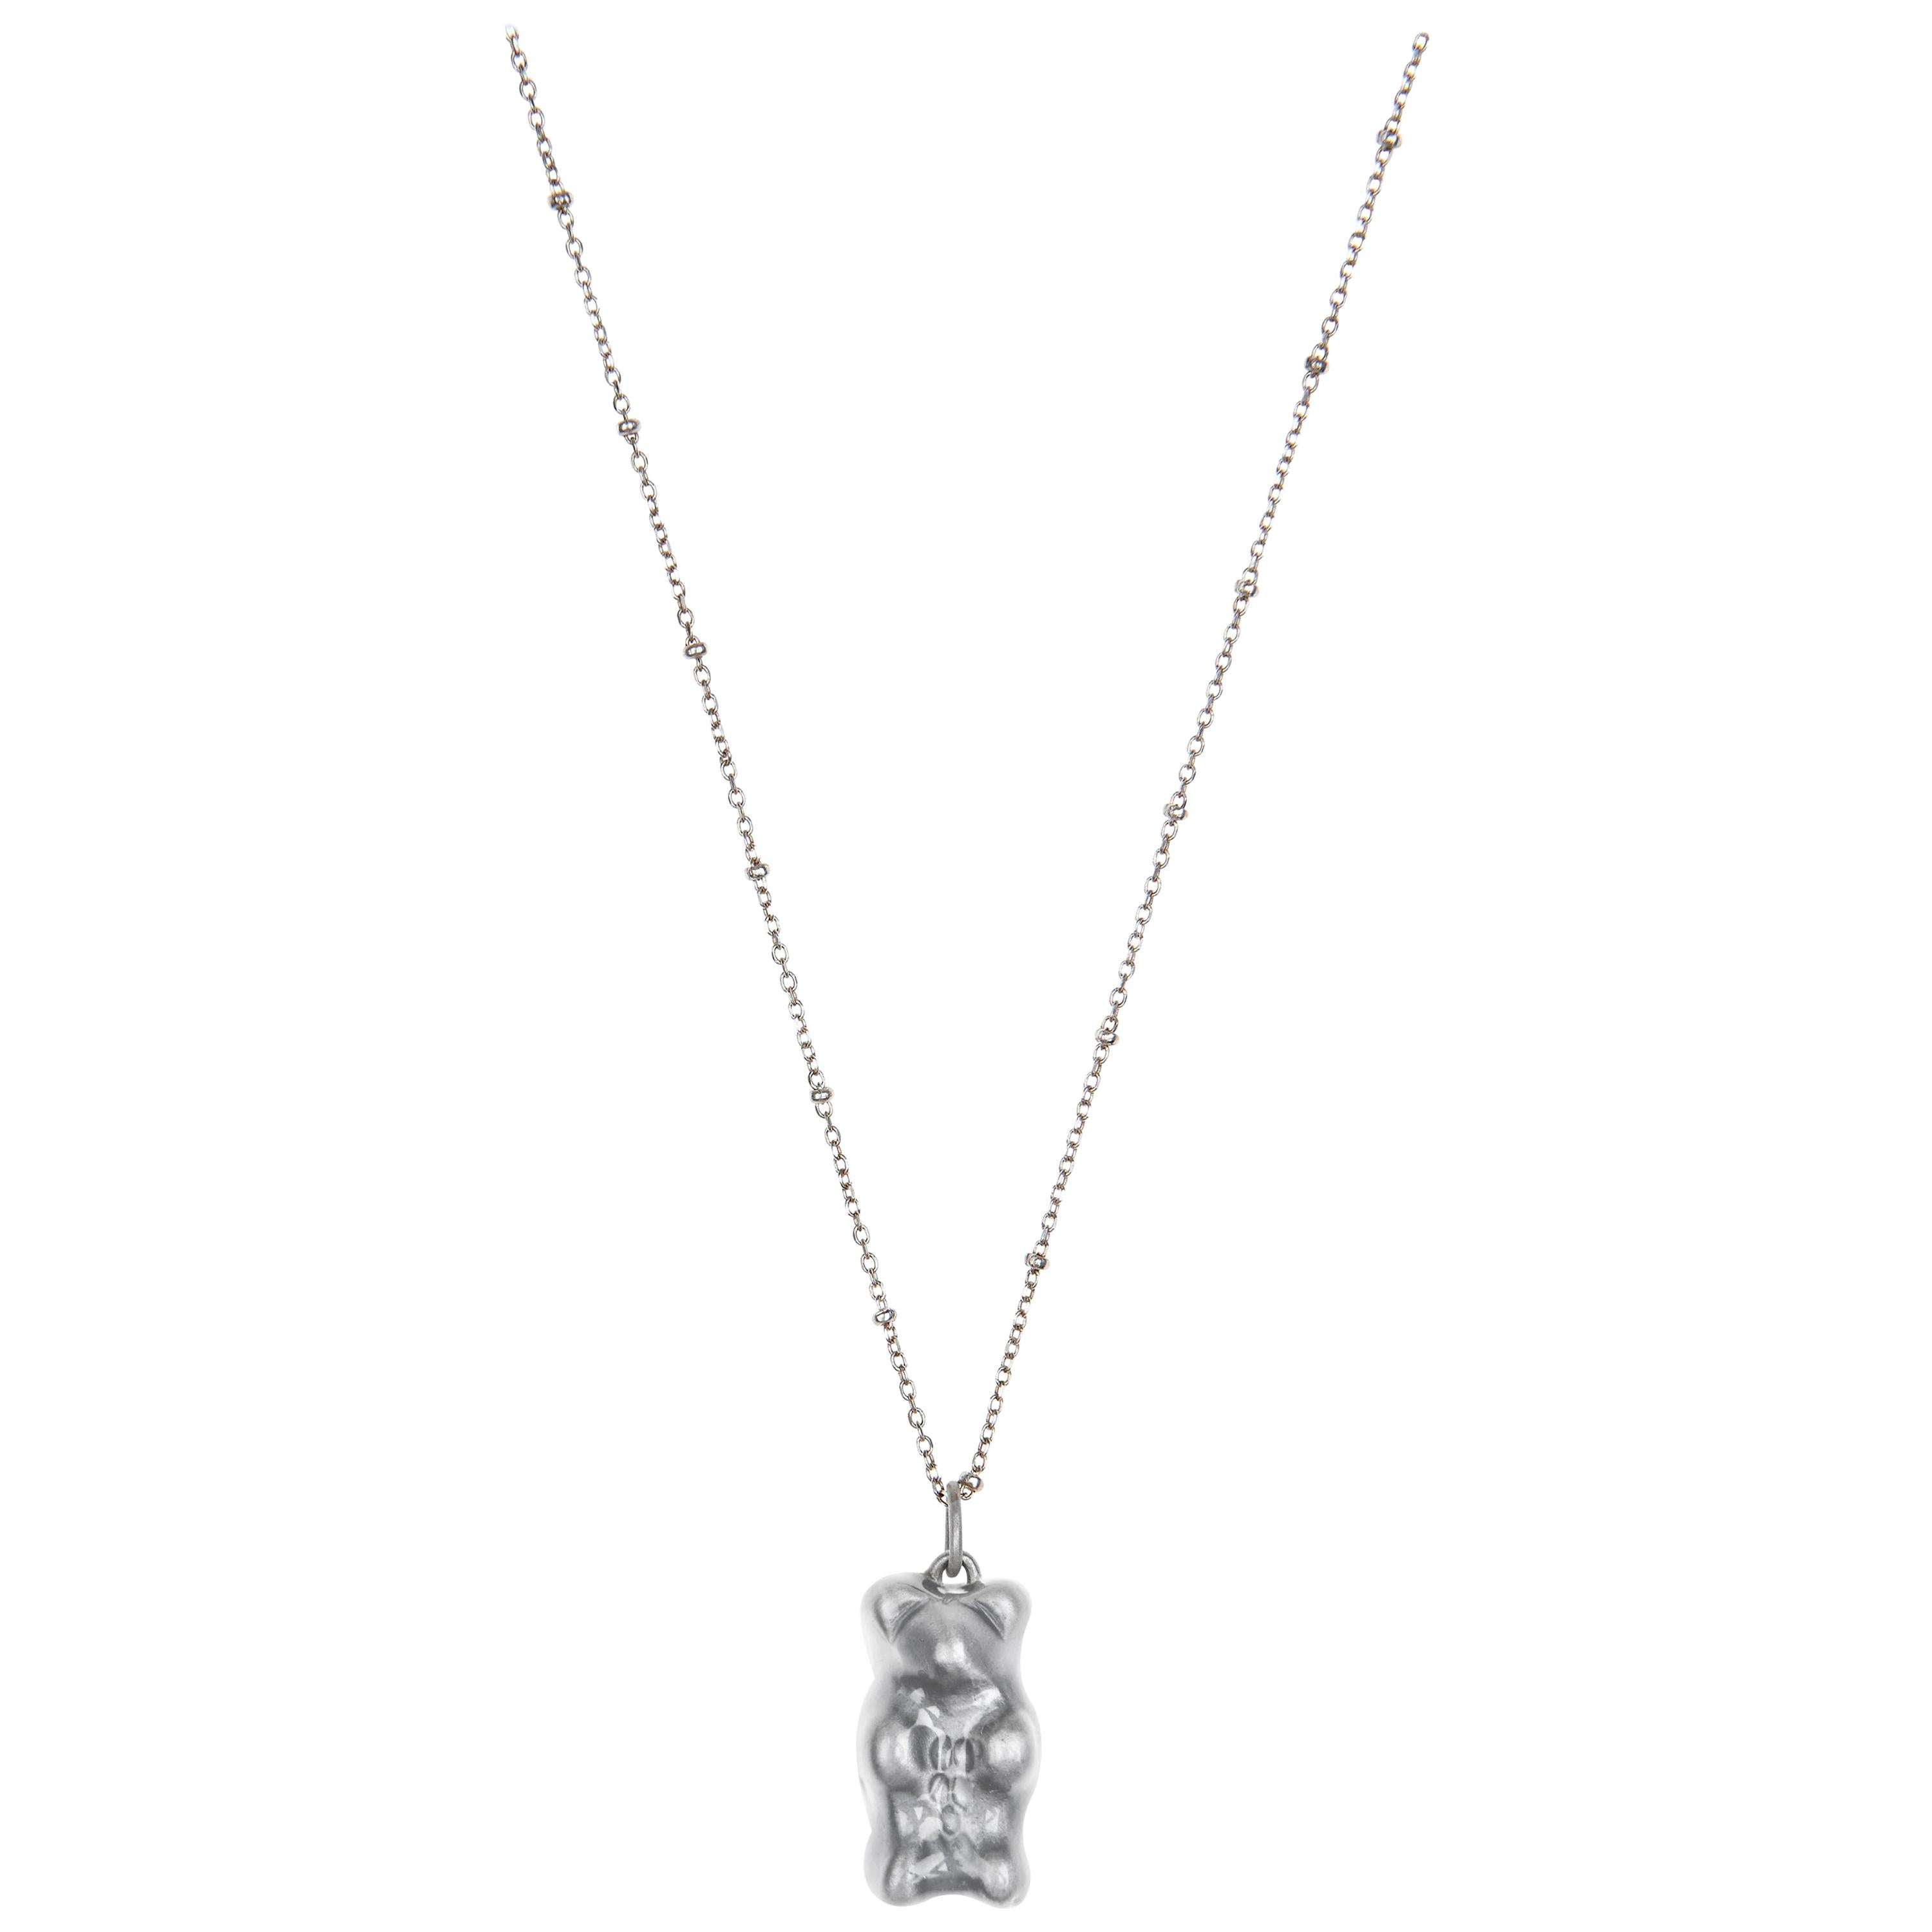 Pendant Necklace Chain Gummy Bear Silver Gift Unisex Silver Plated Greek Jewelry